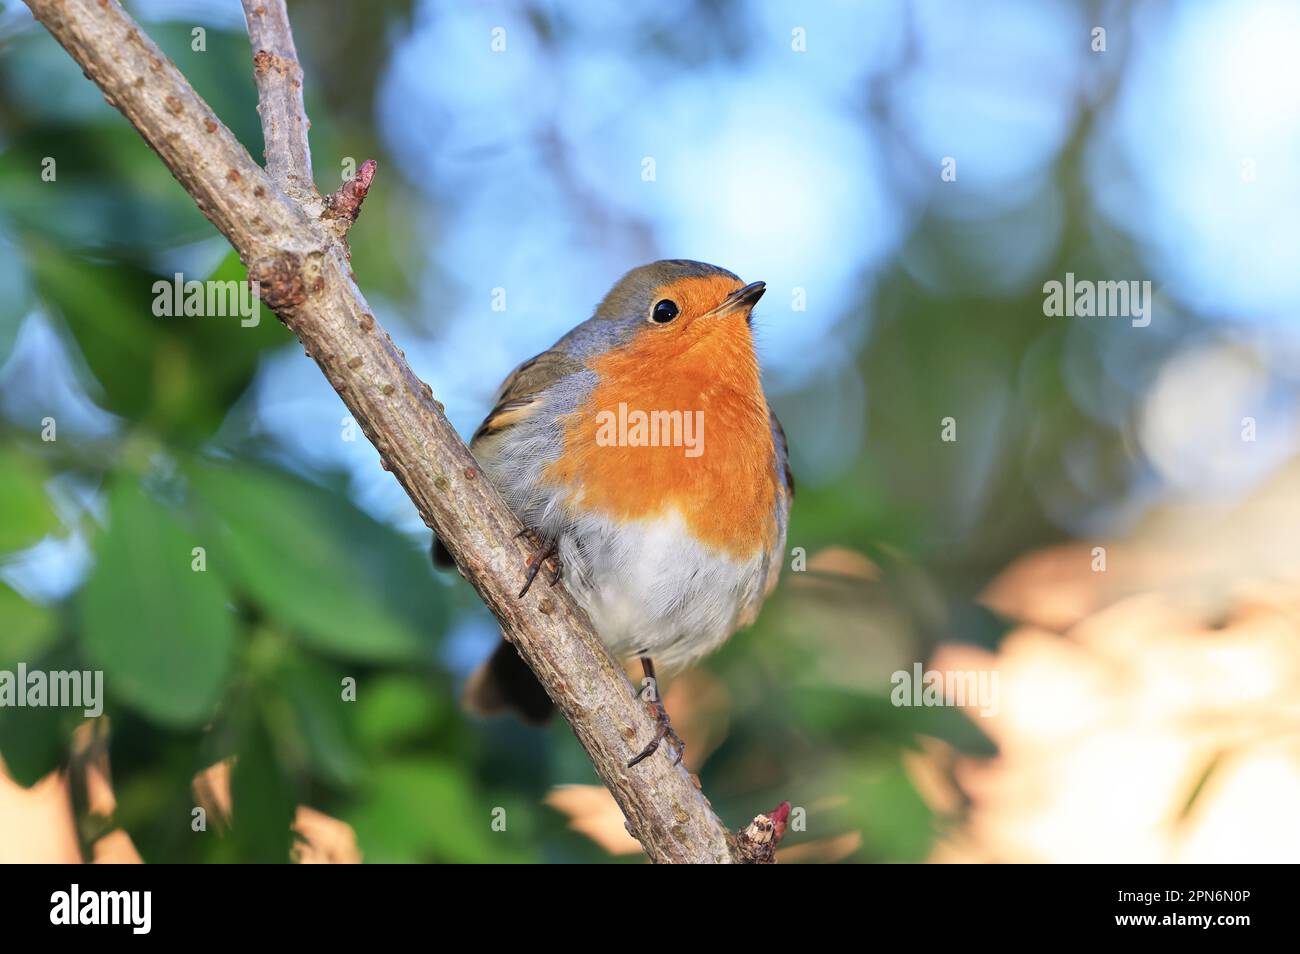 The Robin redbreast (Erithacus rubecula) a British bird that is fiercefully territorial, singing to defend their territory all year round. Stock Photo